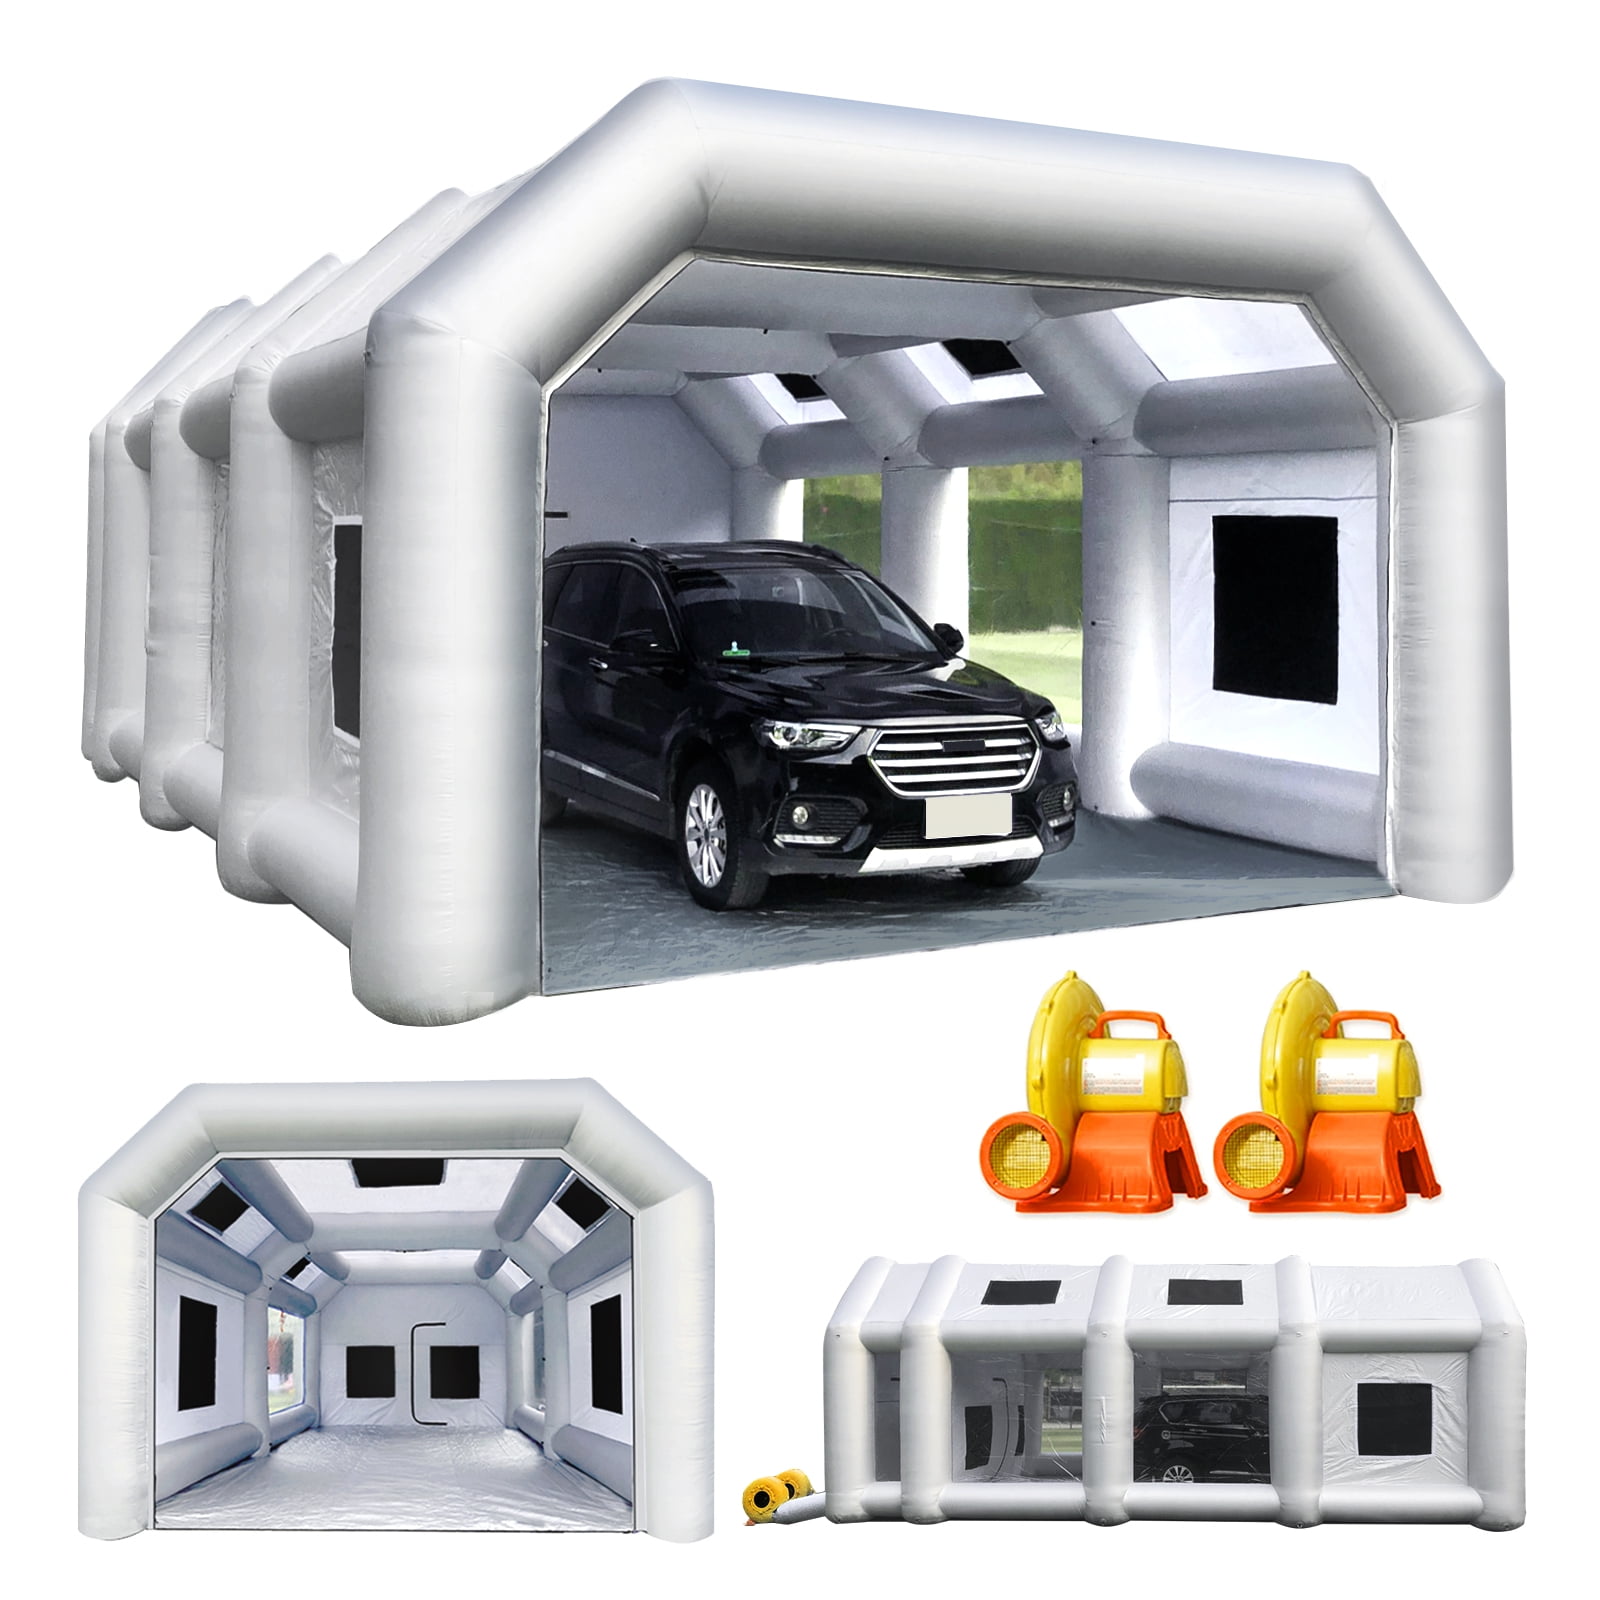 FLAPKWAN 28X15X11.5FT Inflatable Paint Booth for Cars Painting